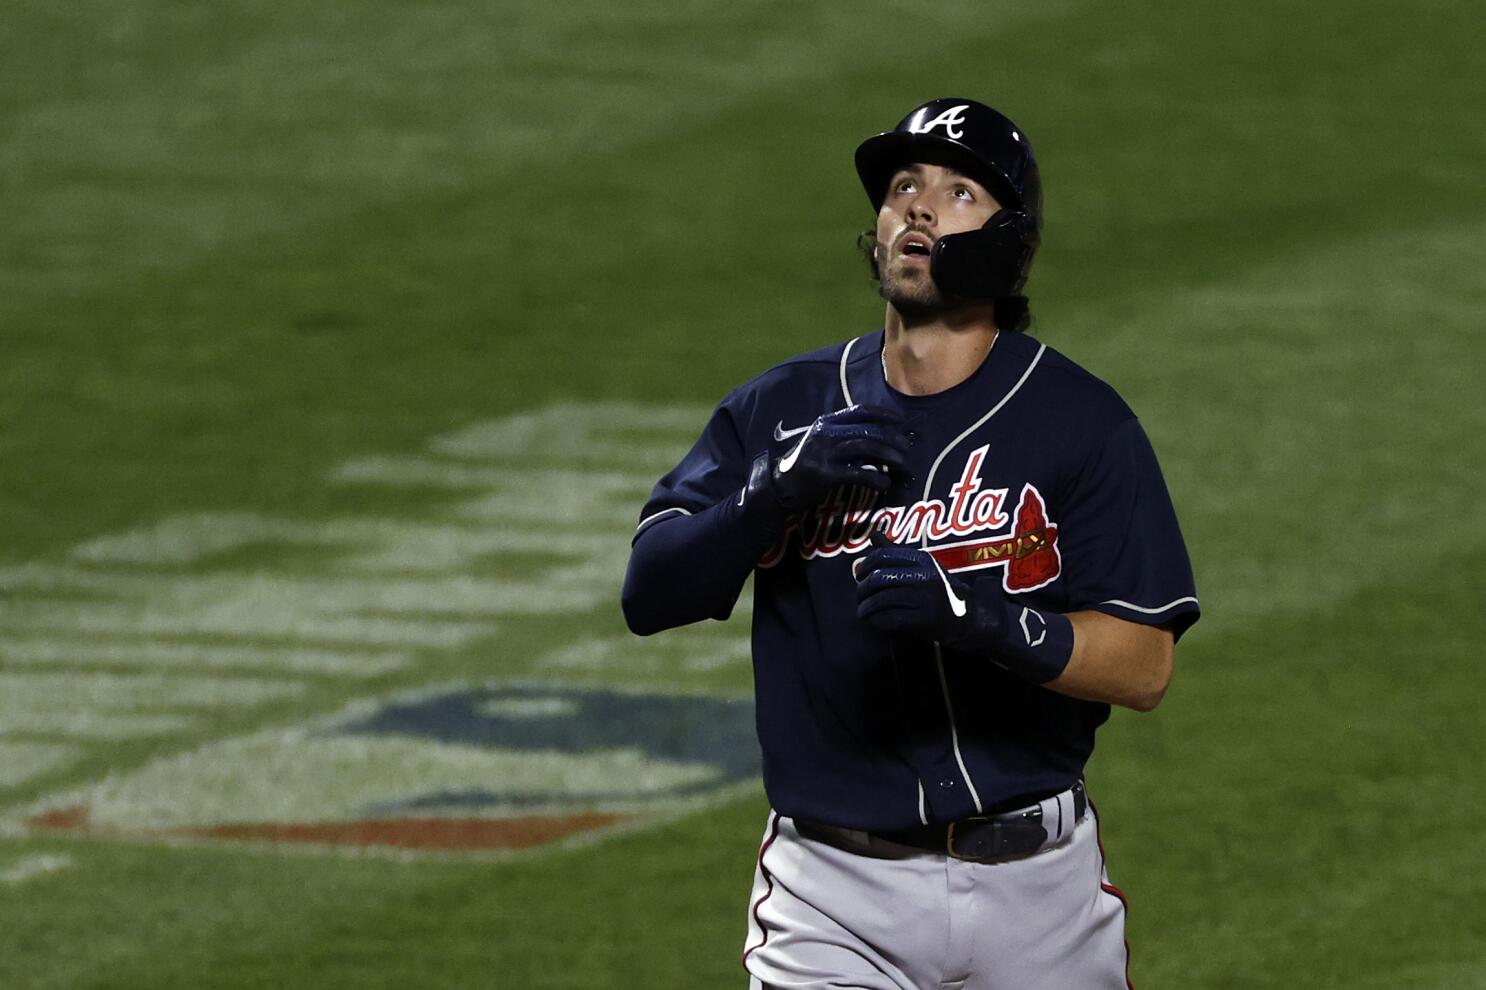 Swanson ties career high with 5 RBIs, Braves rout Mets 14-1 - The